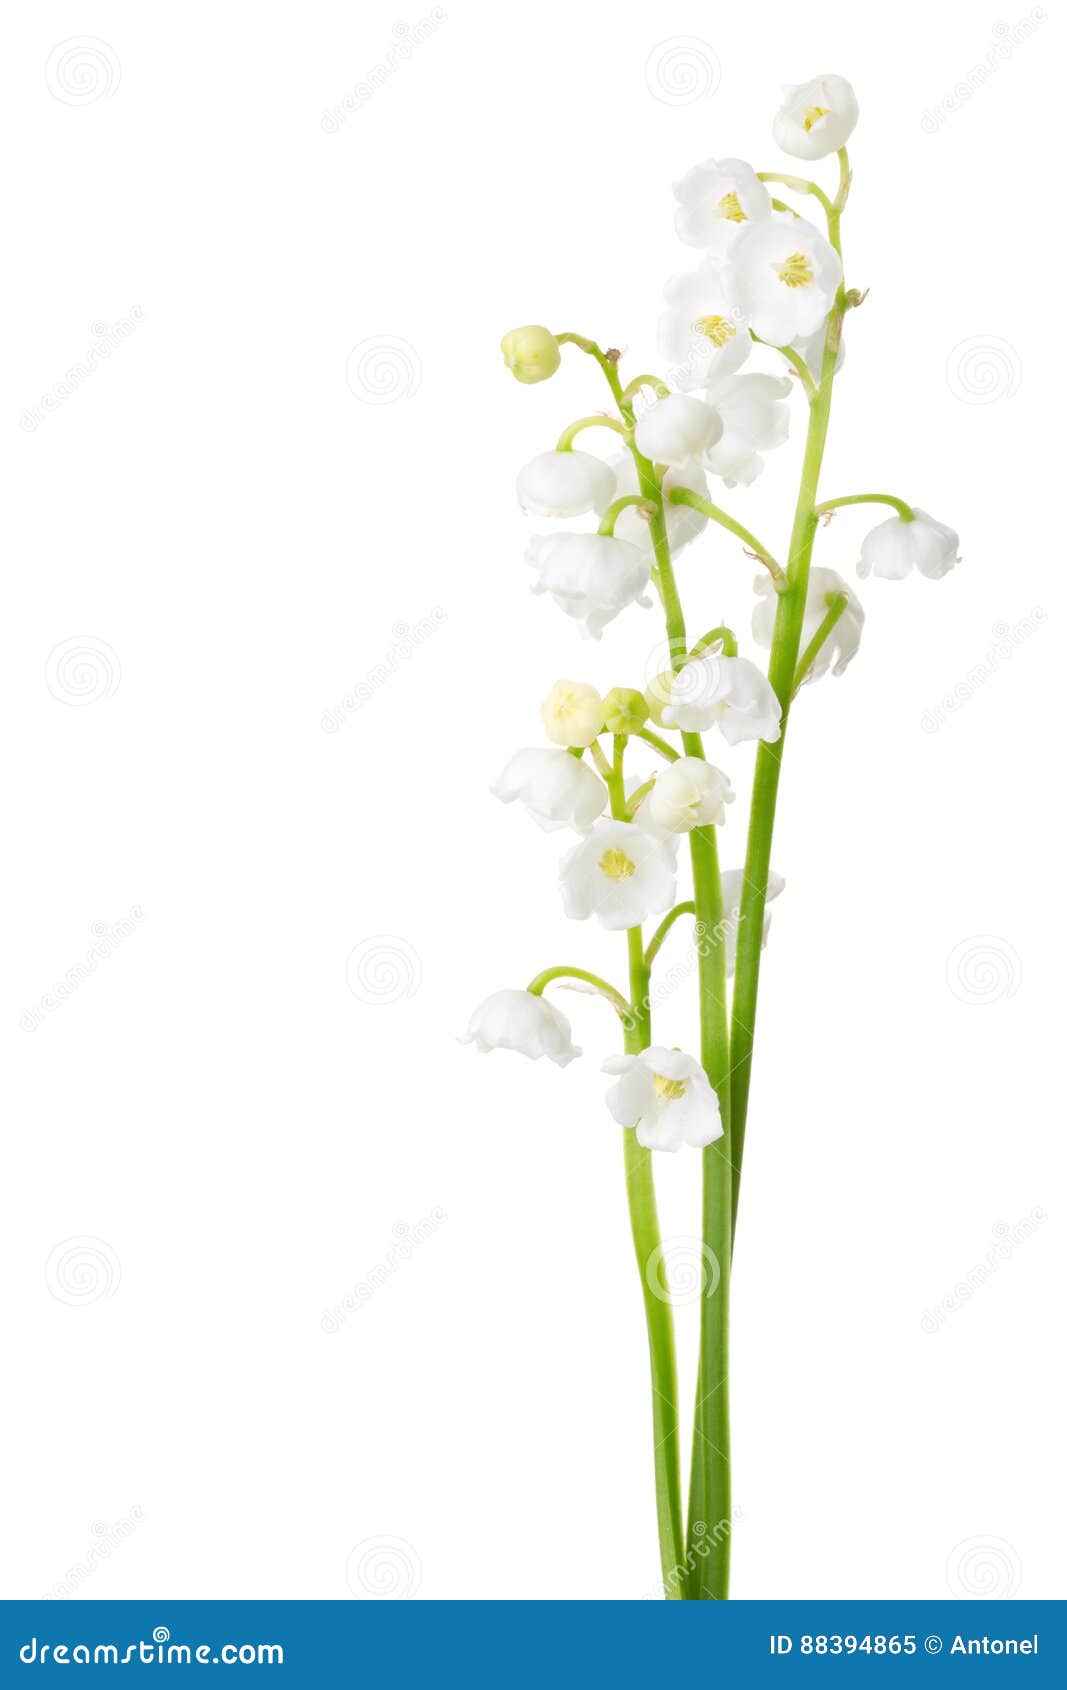 three sprigs of lily of the valley.